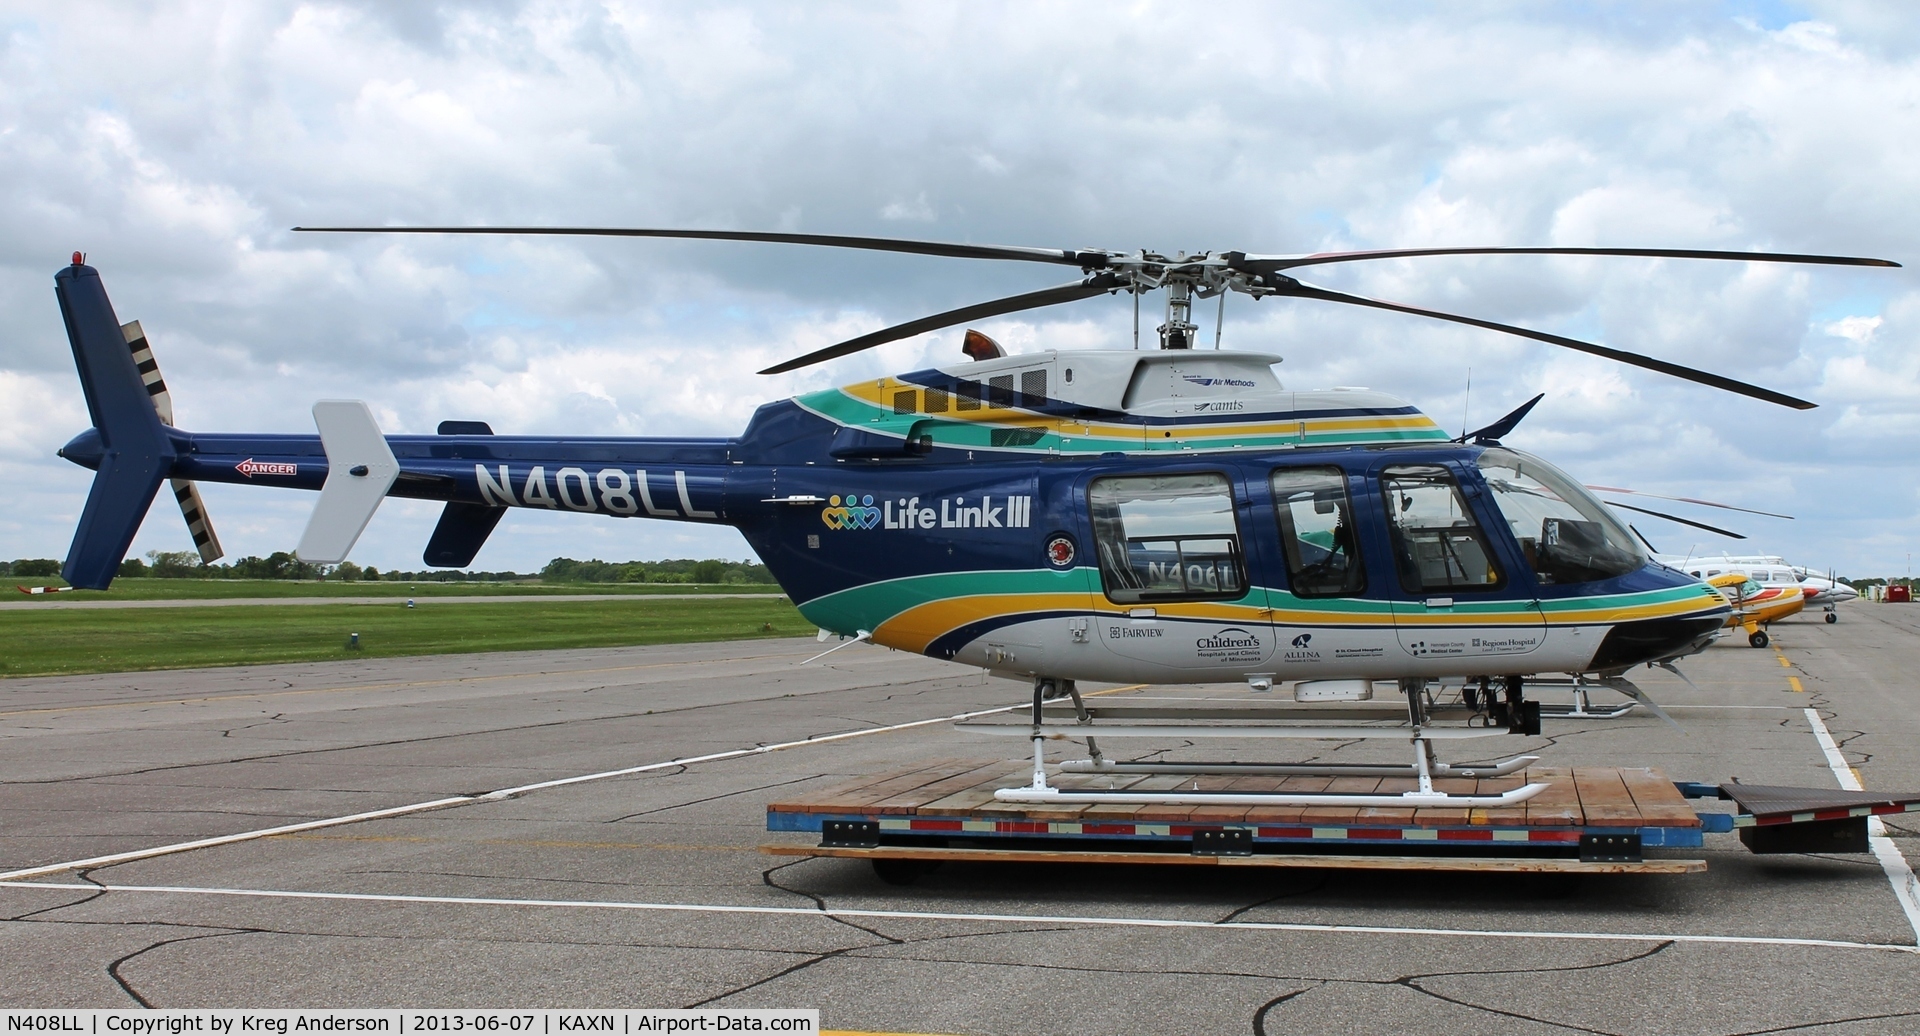 N408LL, 2001 Bell 407 C/N 53483, Bell 407 from LifeLink III on the ramp.